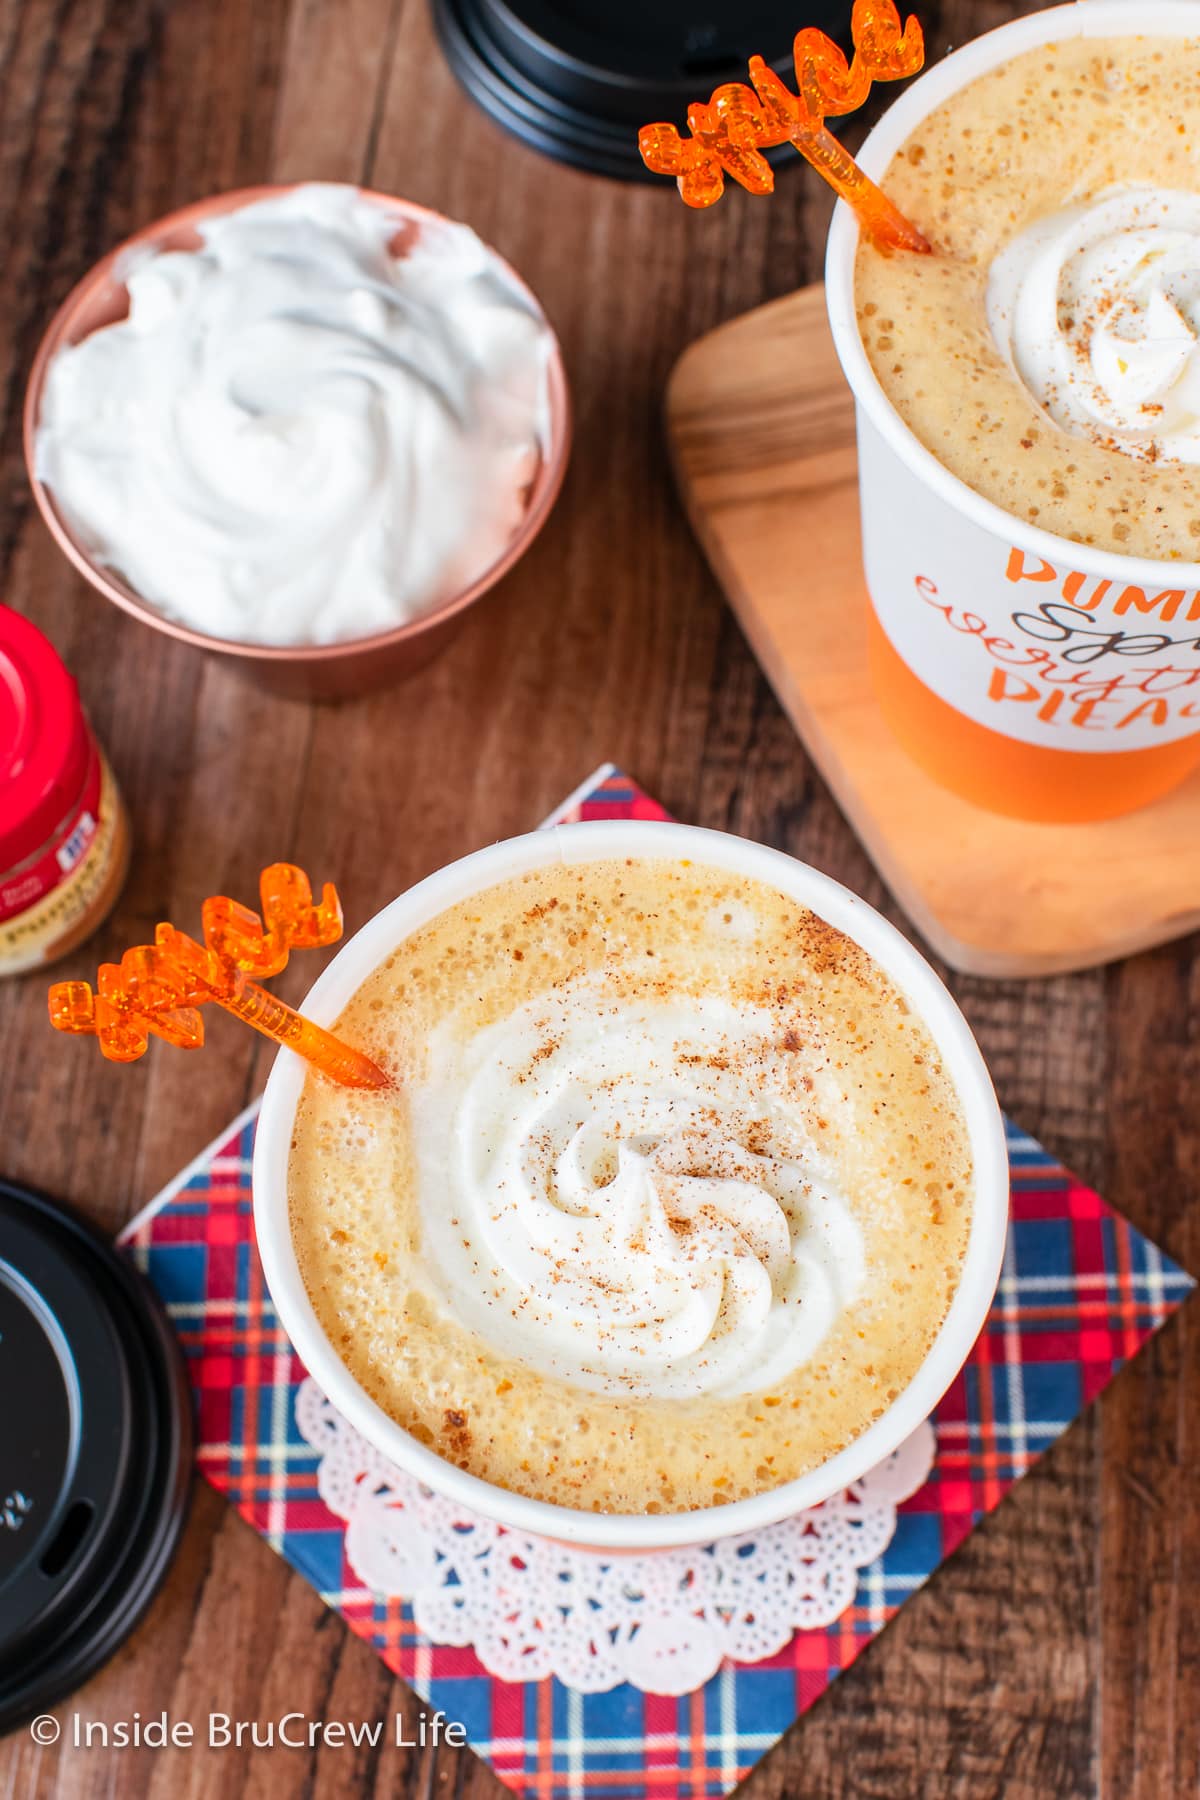 A pumpkin coffee topped with whipped cream.